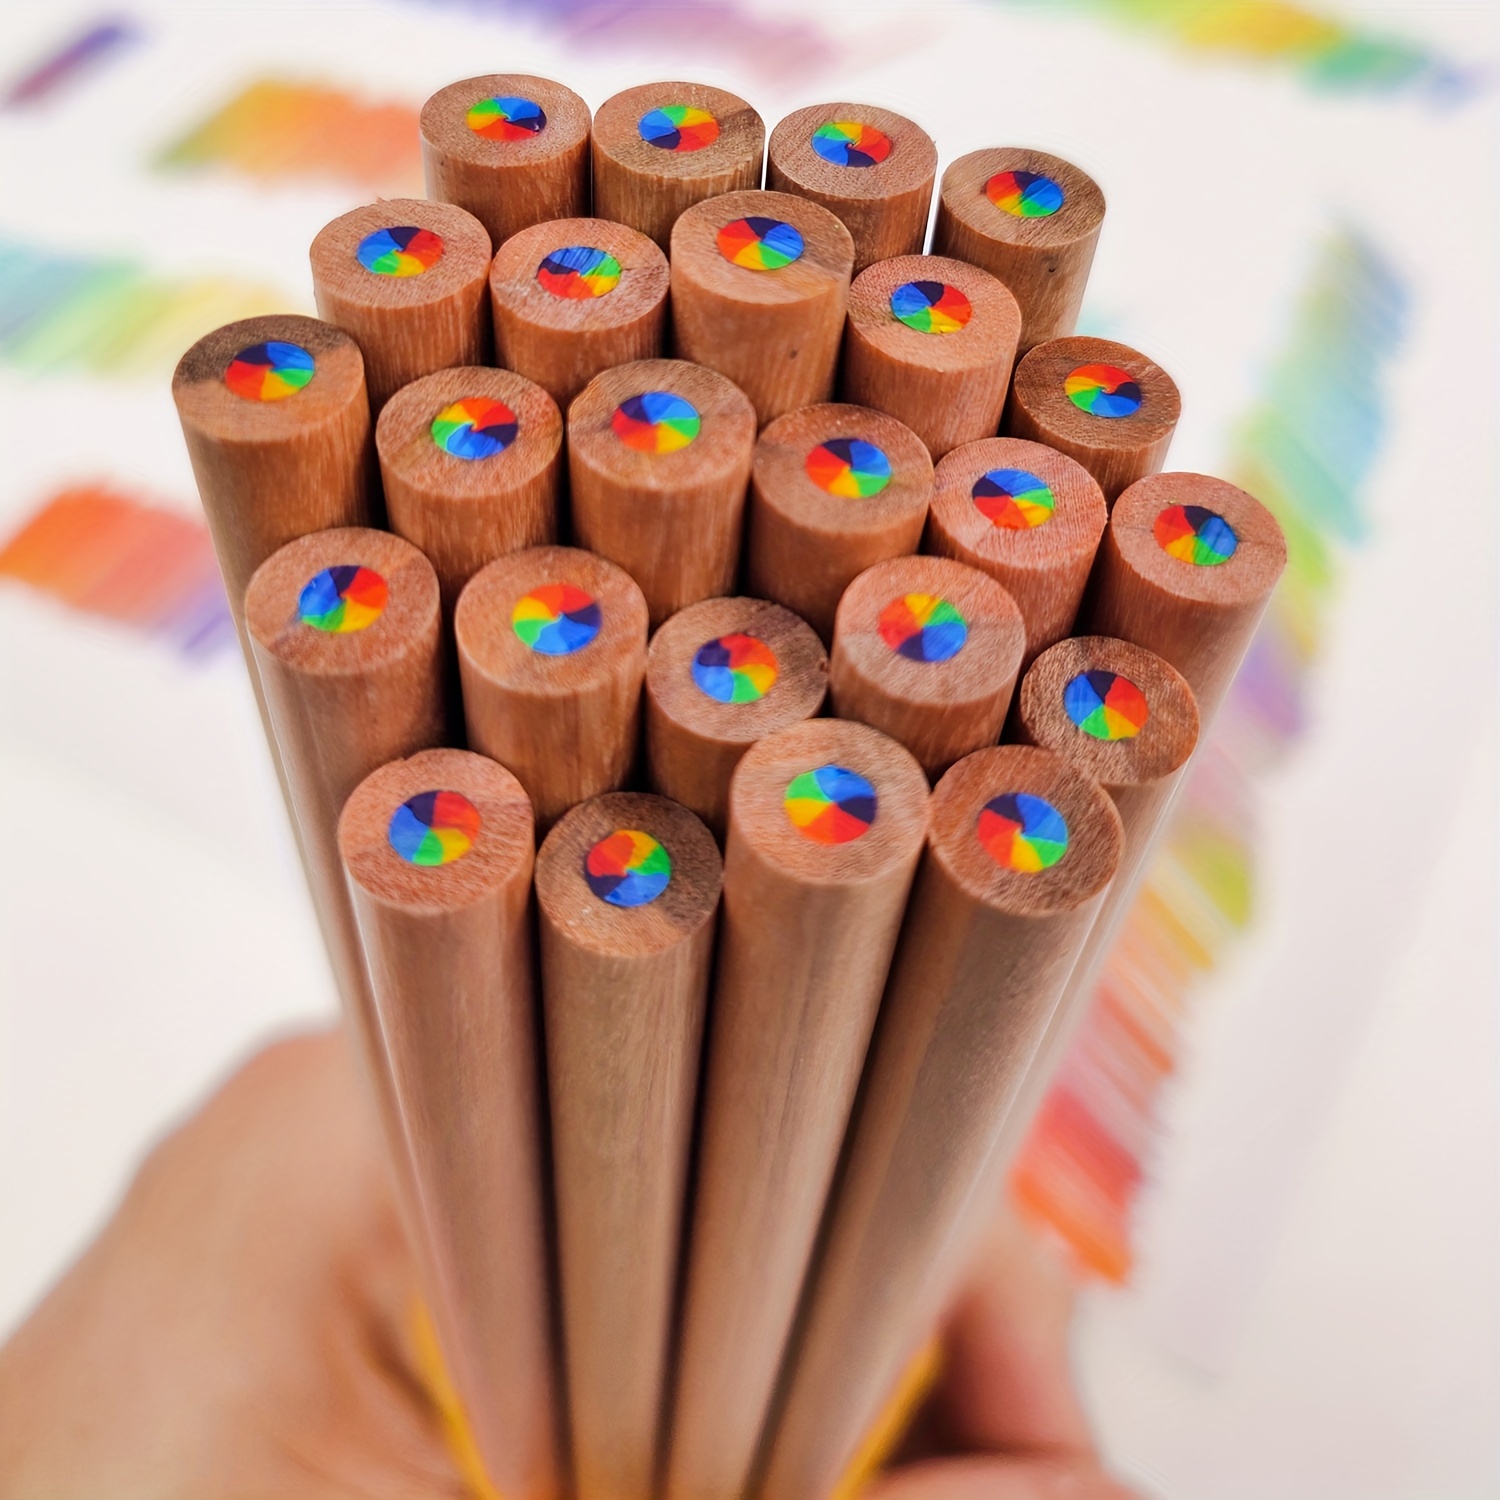 ThEast 7 Color in 1 Rainbow Pencils for Kids, 30 Pieces Rainbow Colored  Pencils, Assorted Colors for Drawing Coloring Sketching Pencils For Drawing